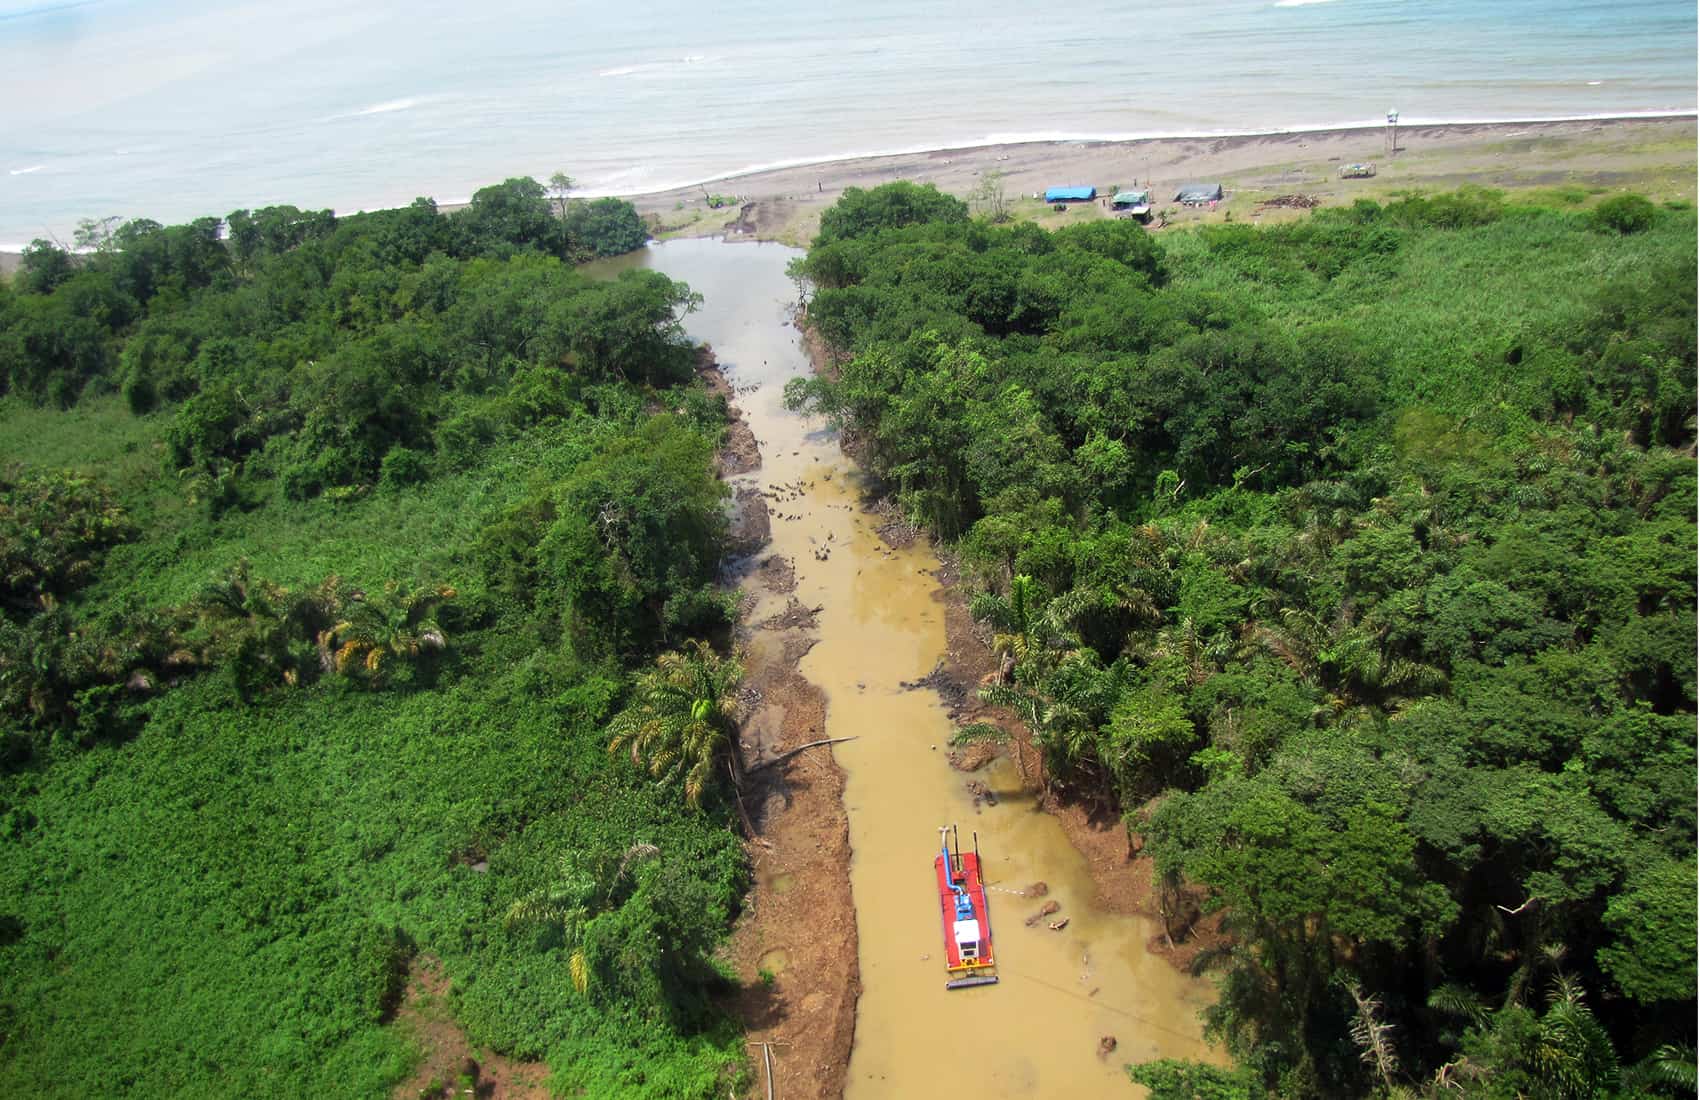 Artificial canals at Costa Rica's border territory